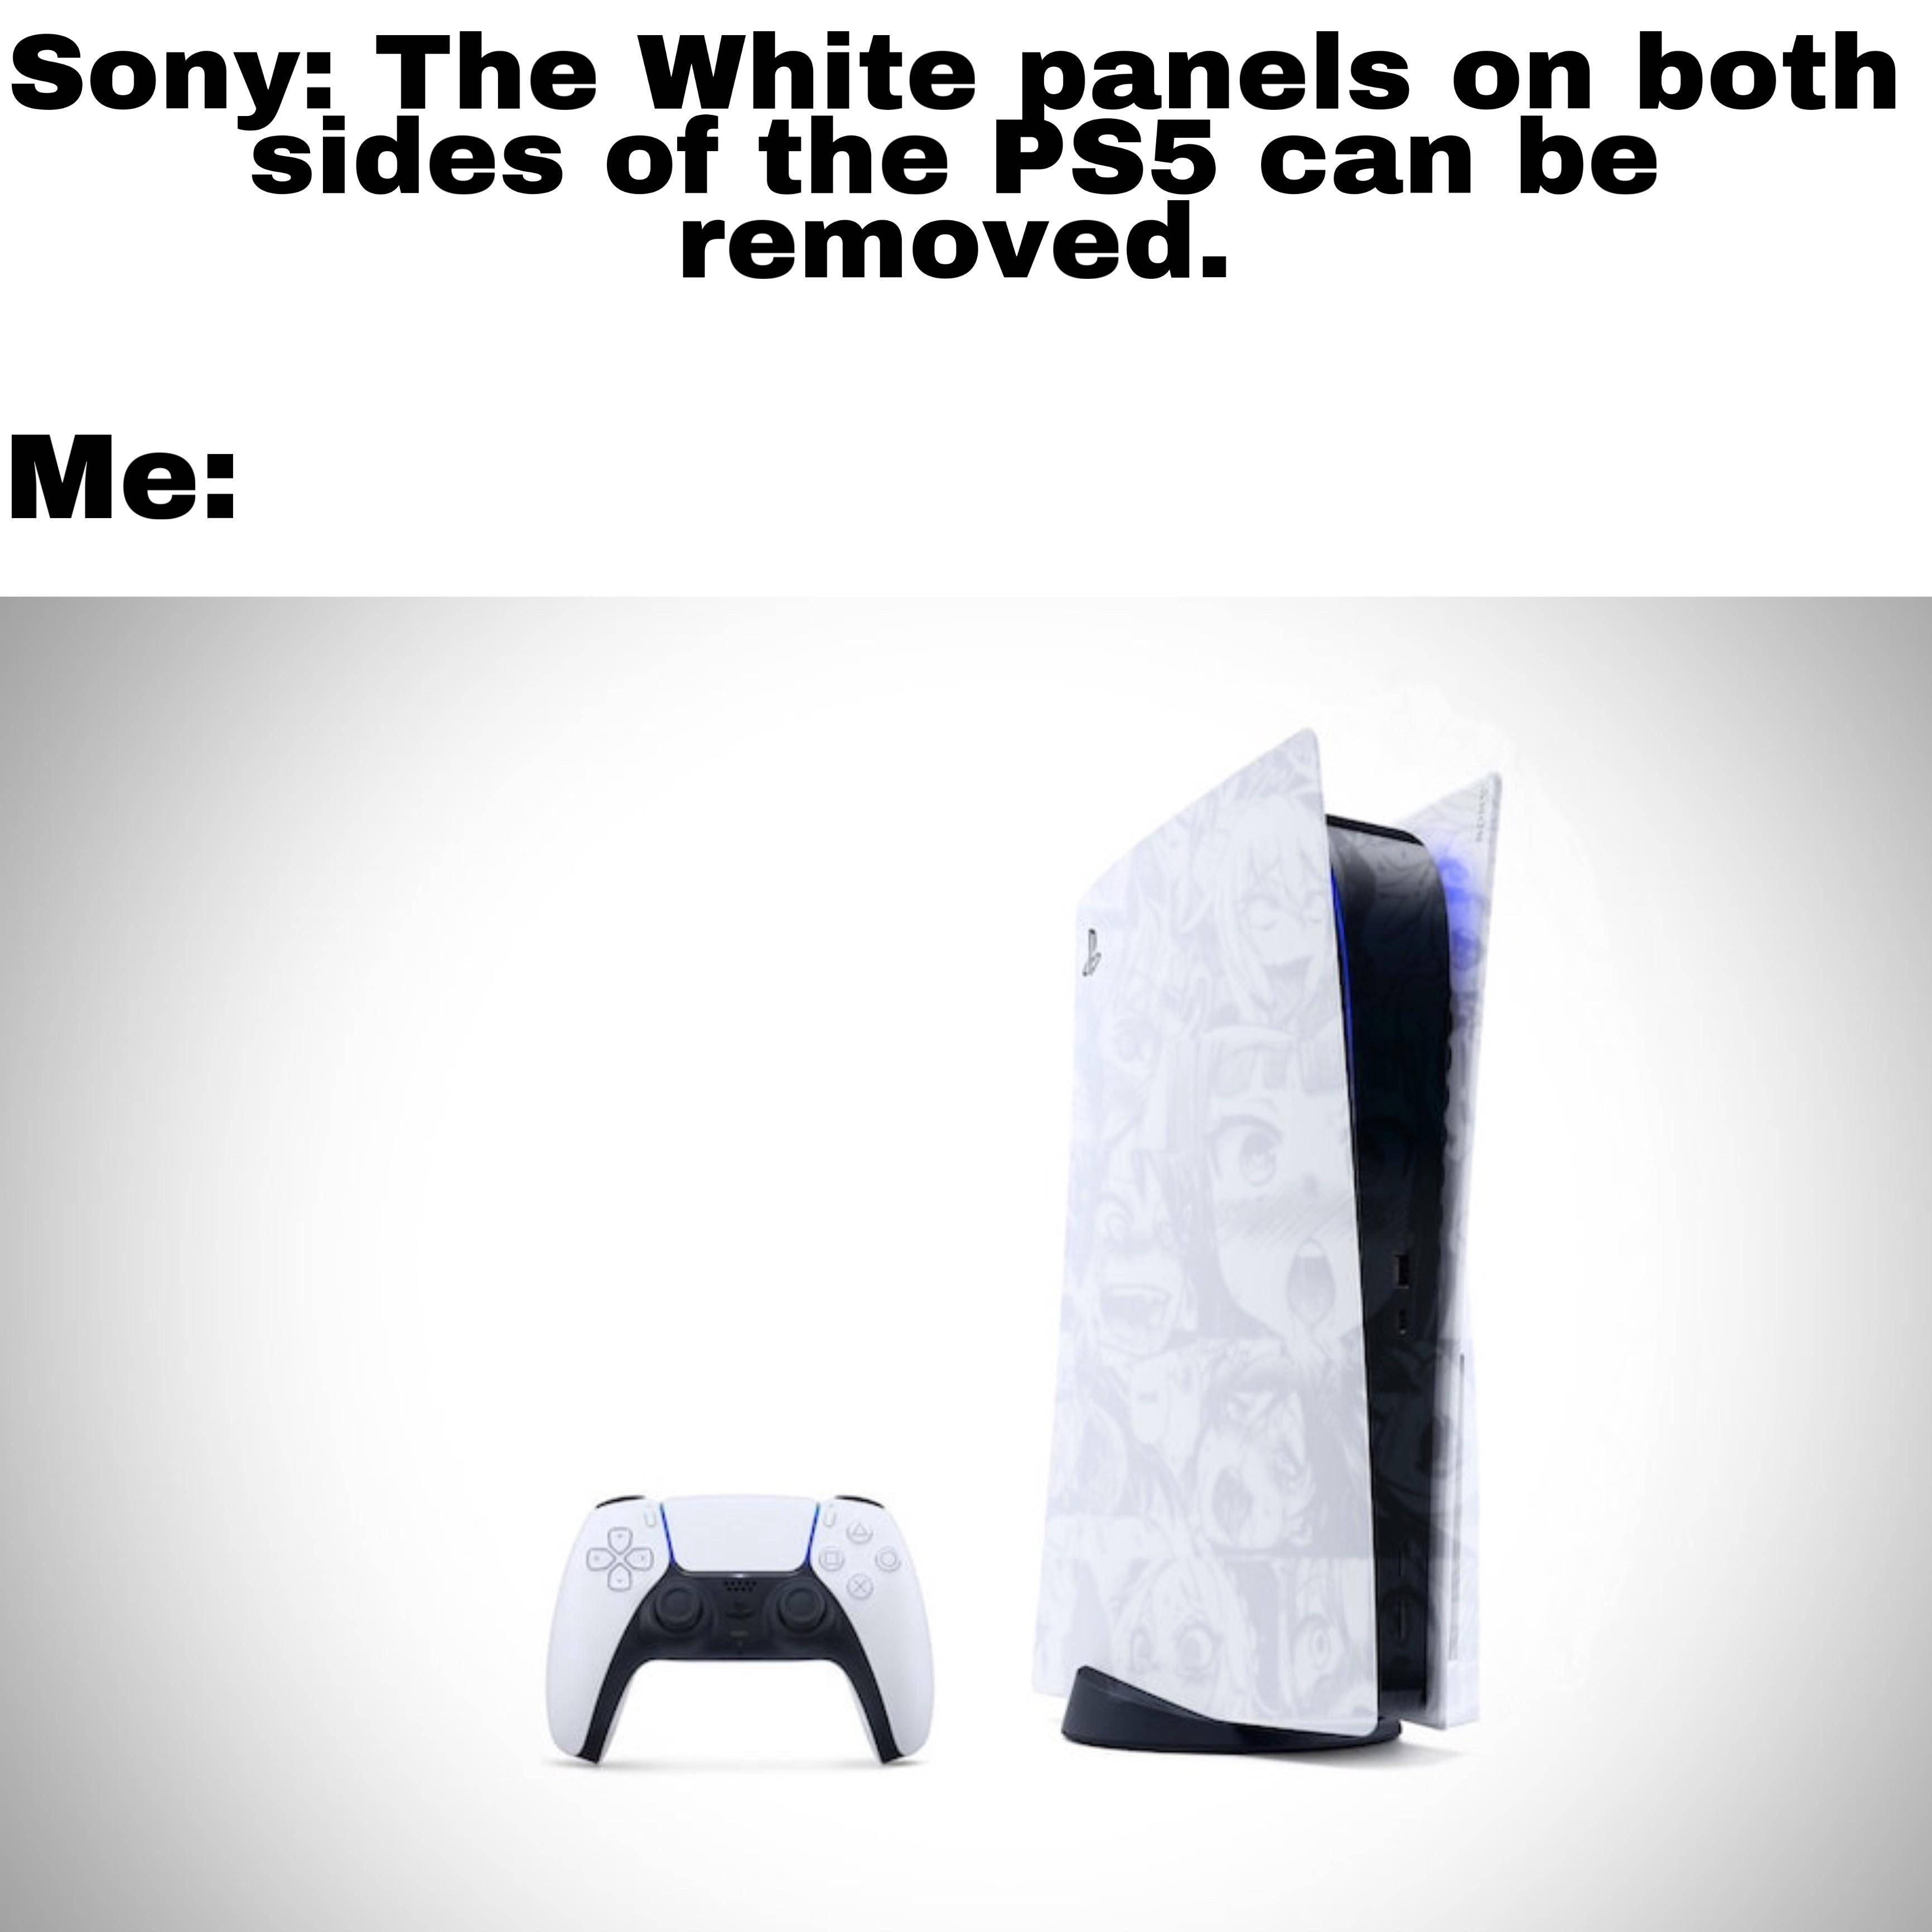 ps5 secured memes - design - Sony The White panels on both sides of the PS5 can be removed. Me b